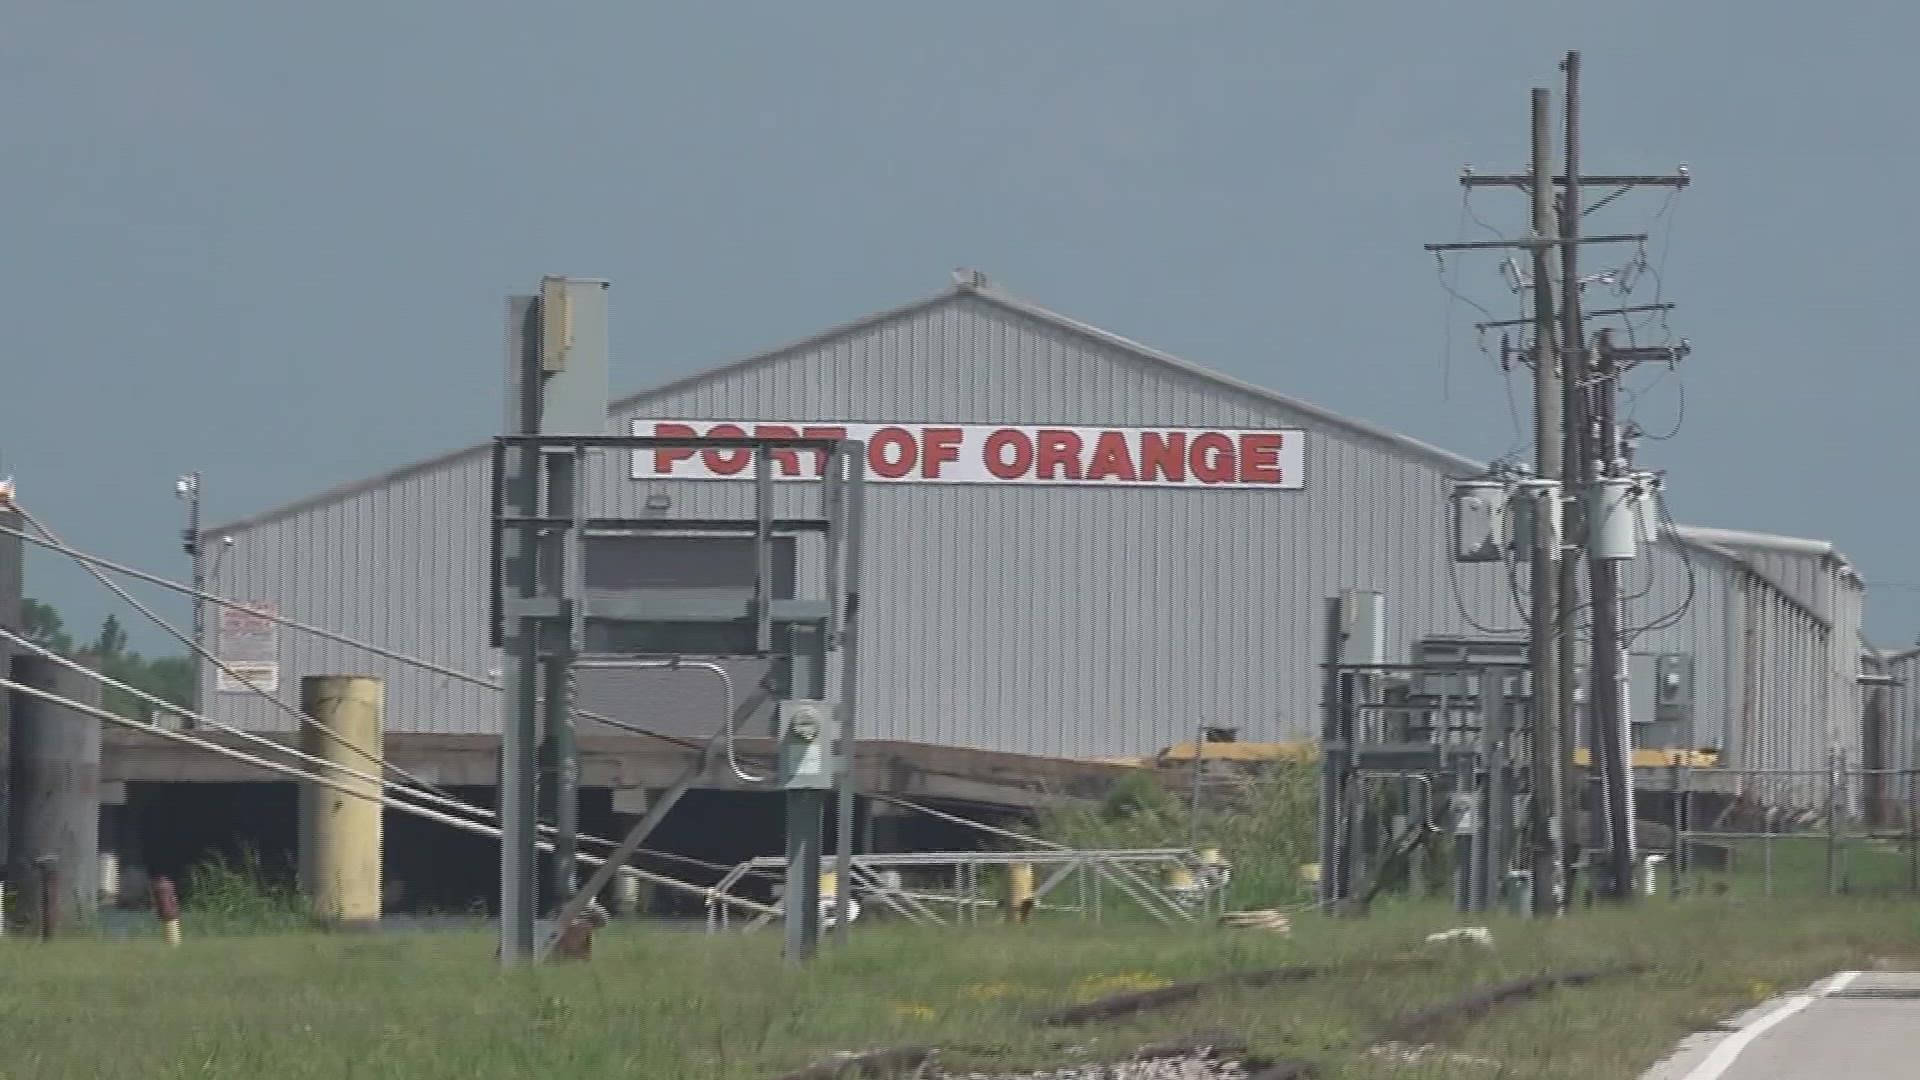 The Port of Orange is growing and the new funding from TxDOT will give a much-needed boost to the local economy.